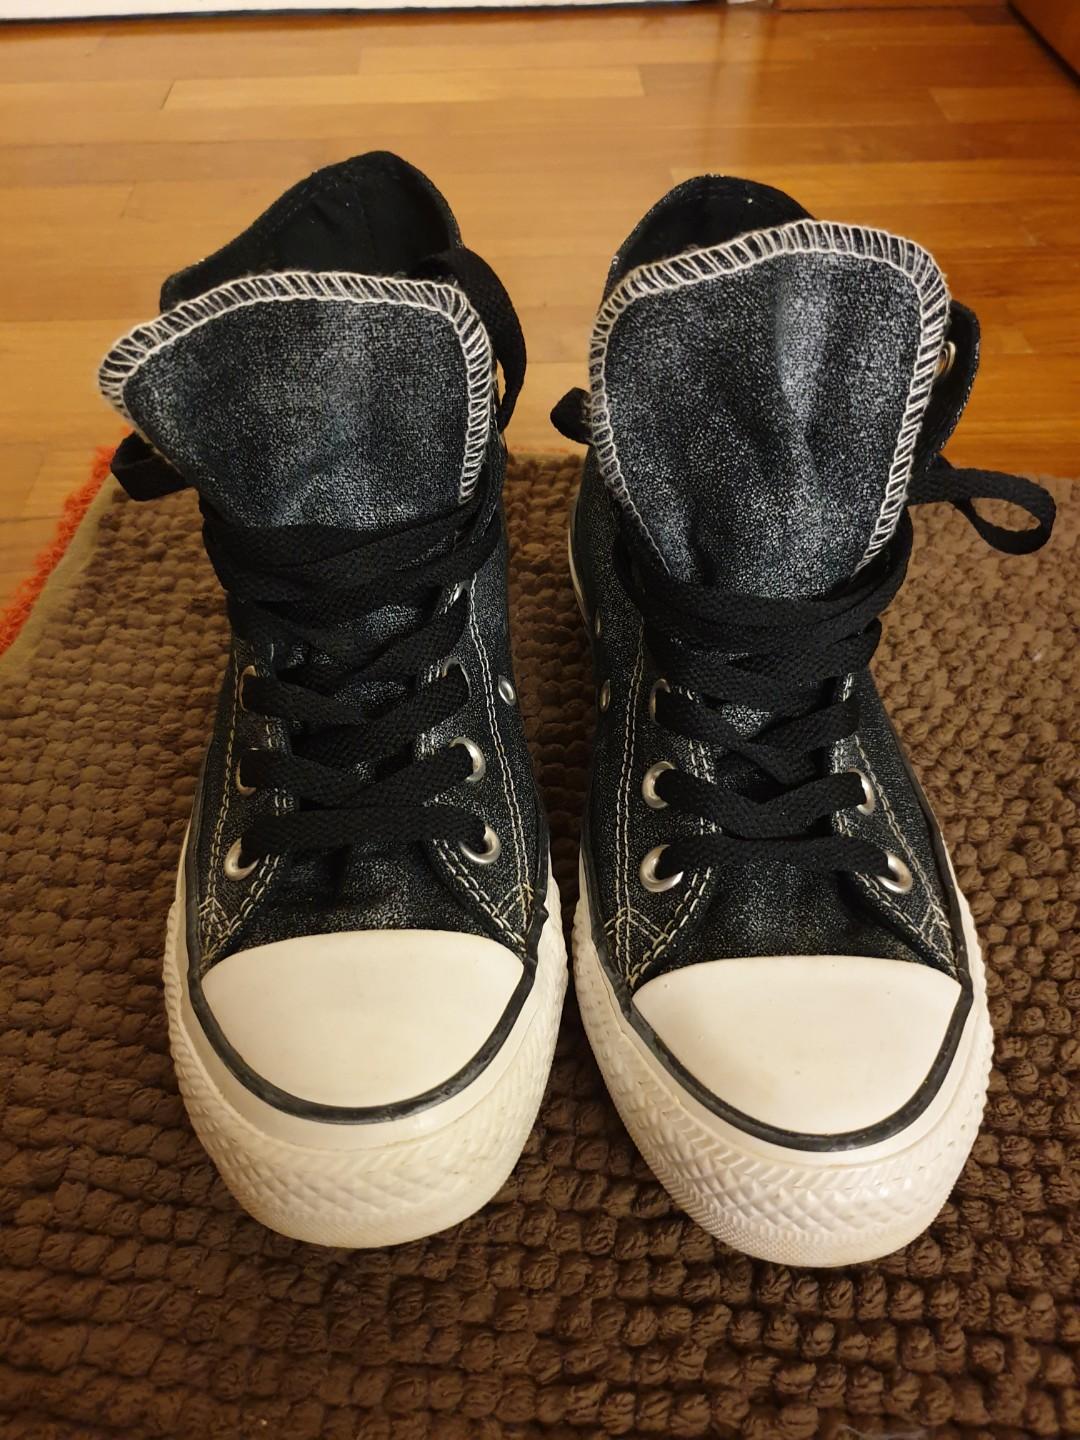 converse all star size 4